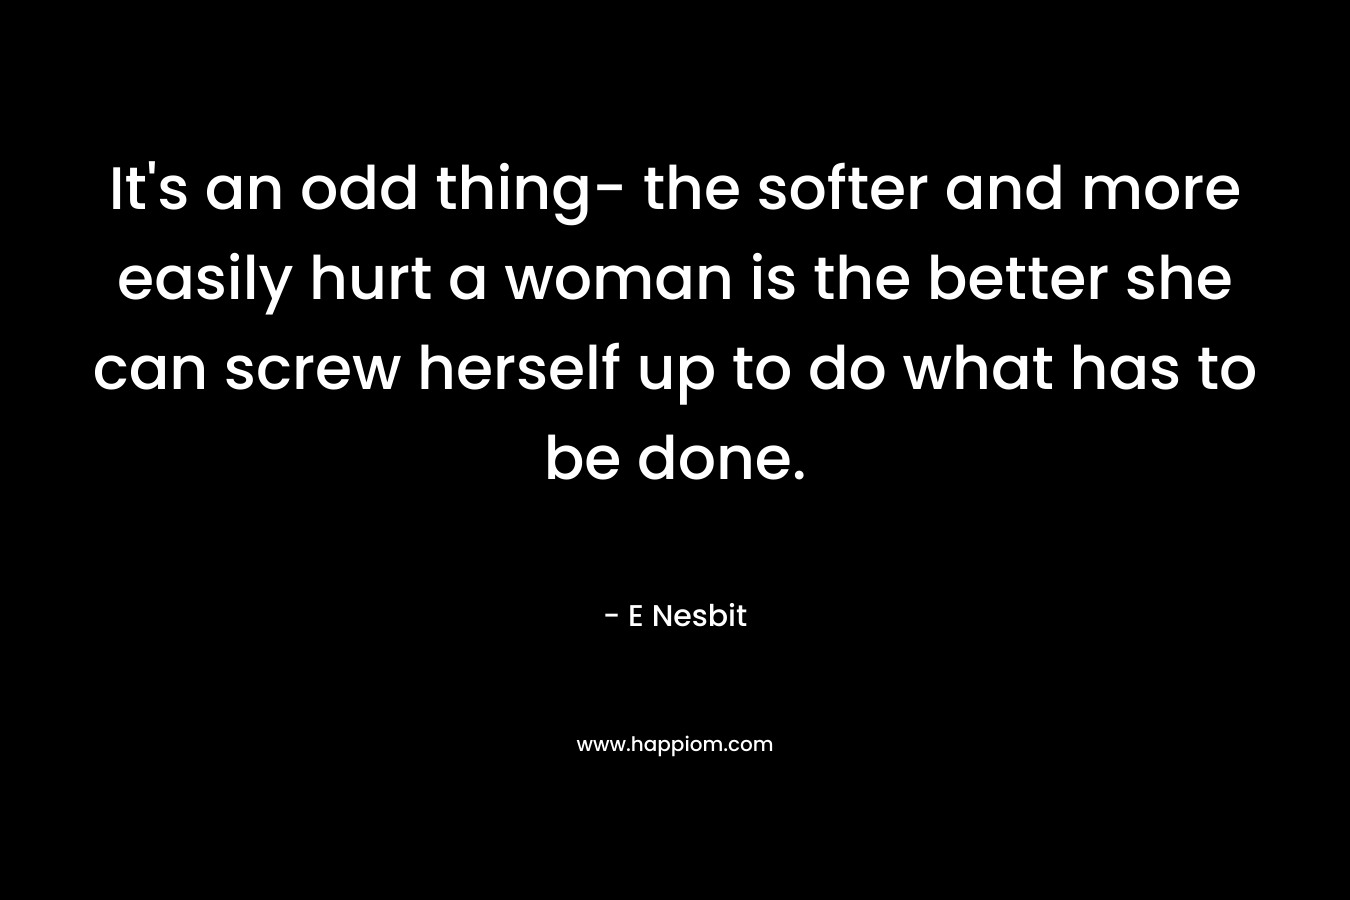 It’s an odd thing- the softer and more easily hurt a woman is the better she can screw herself up to do what has to be done. – E Nesbit